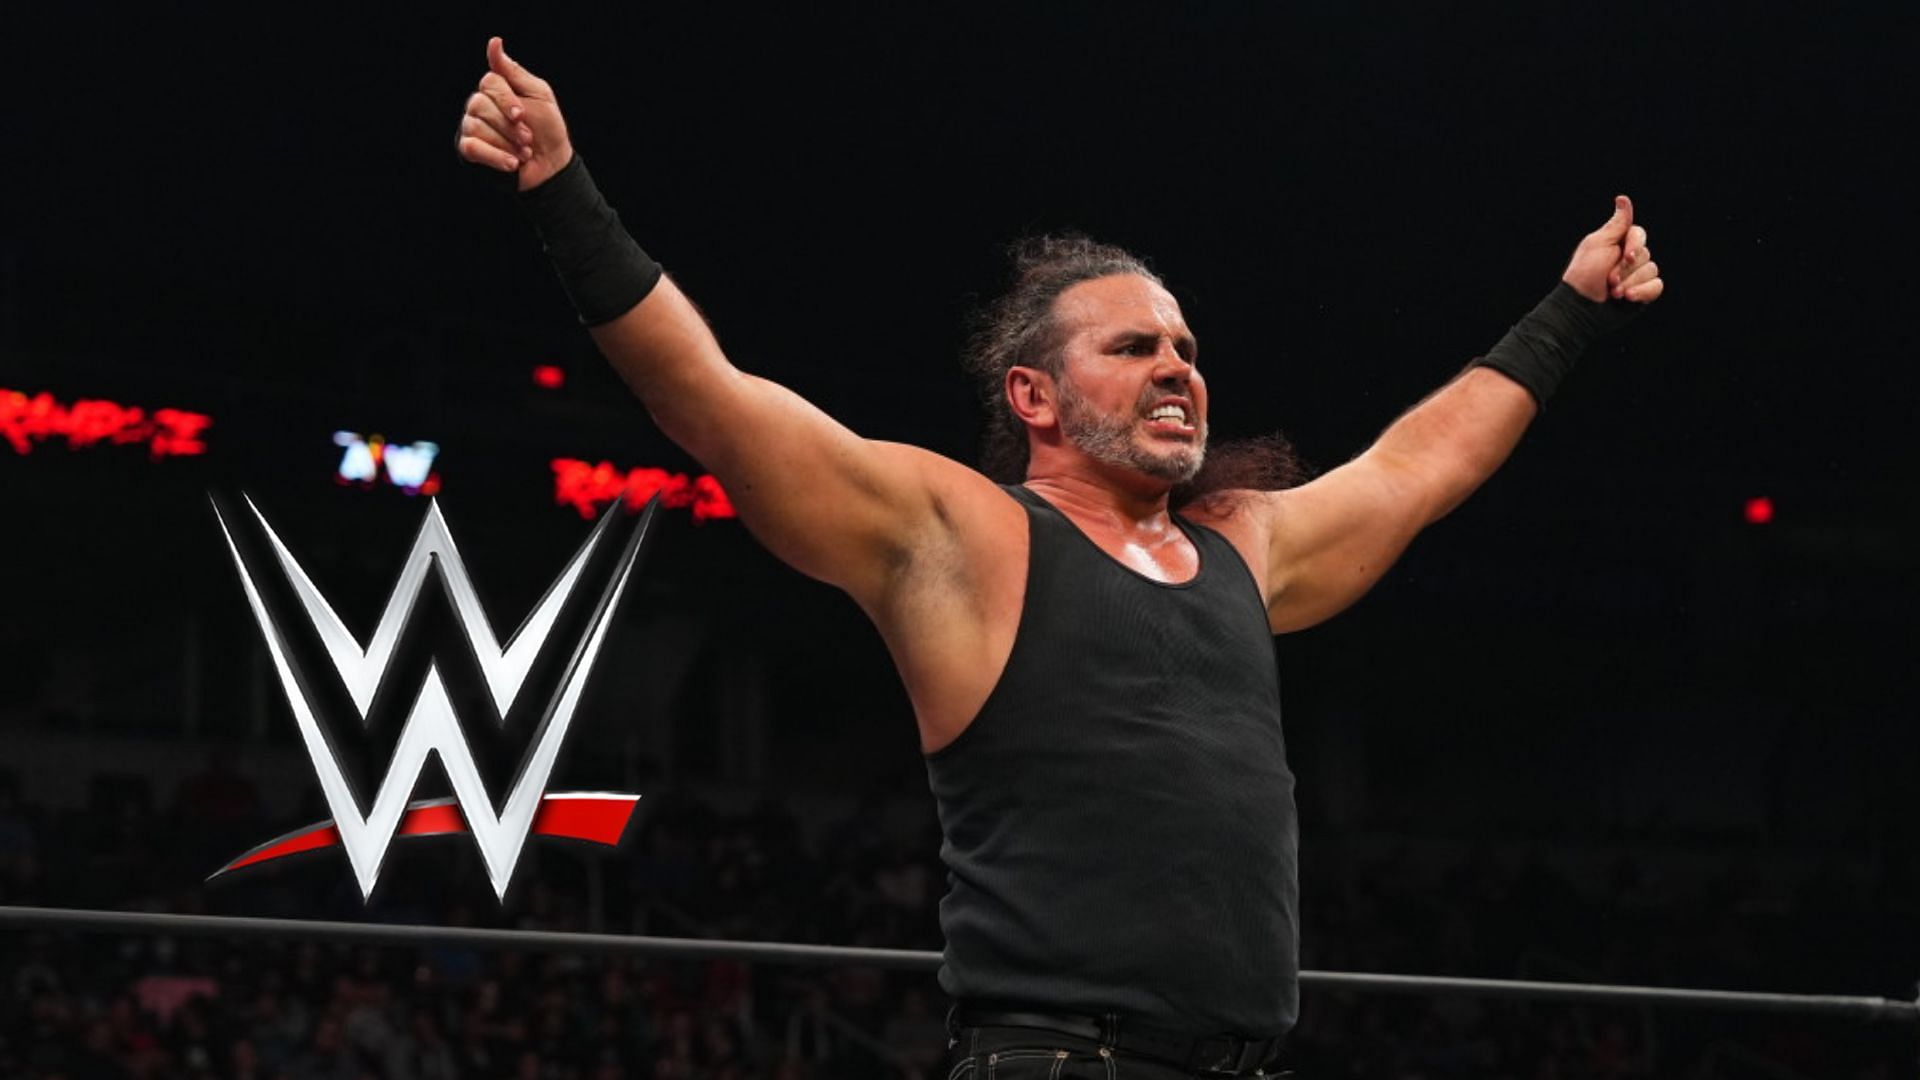 Matt Hardy is a former WWE Superstar who now works for AEW.